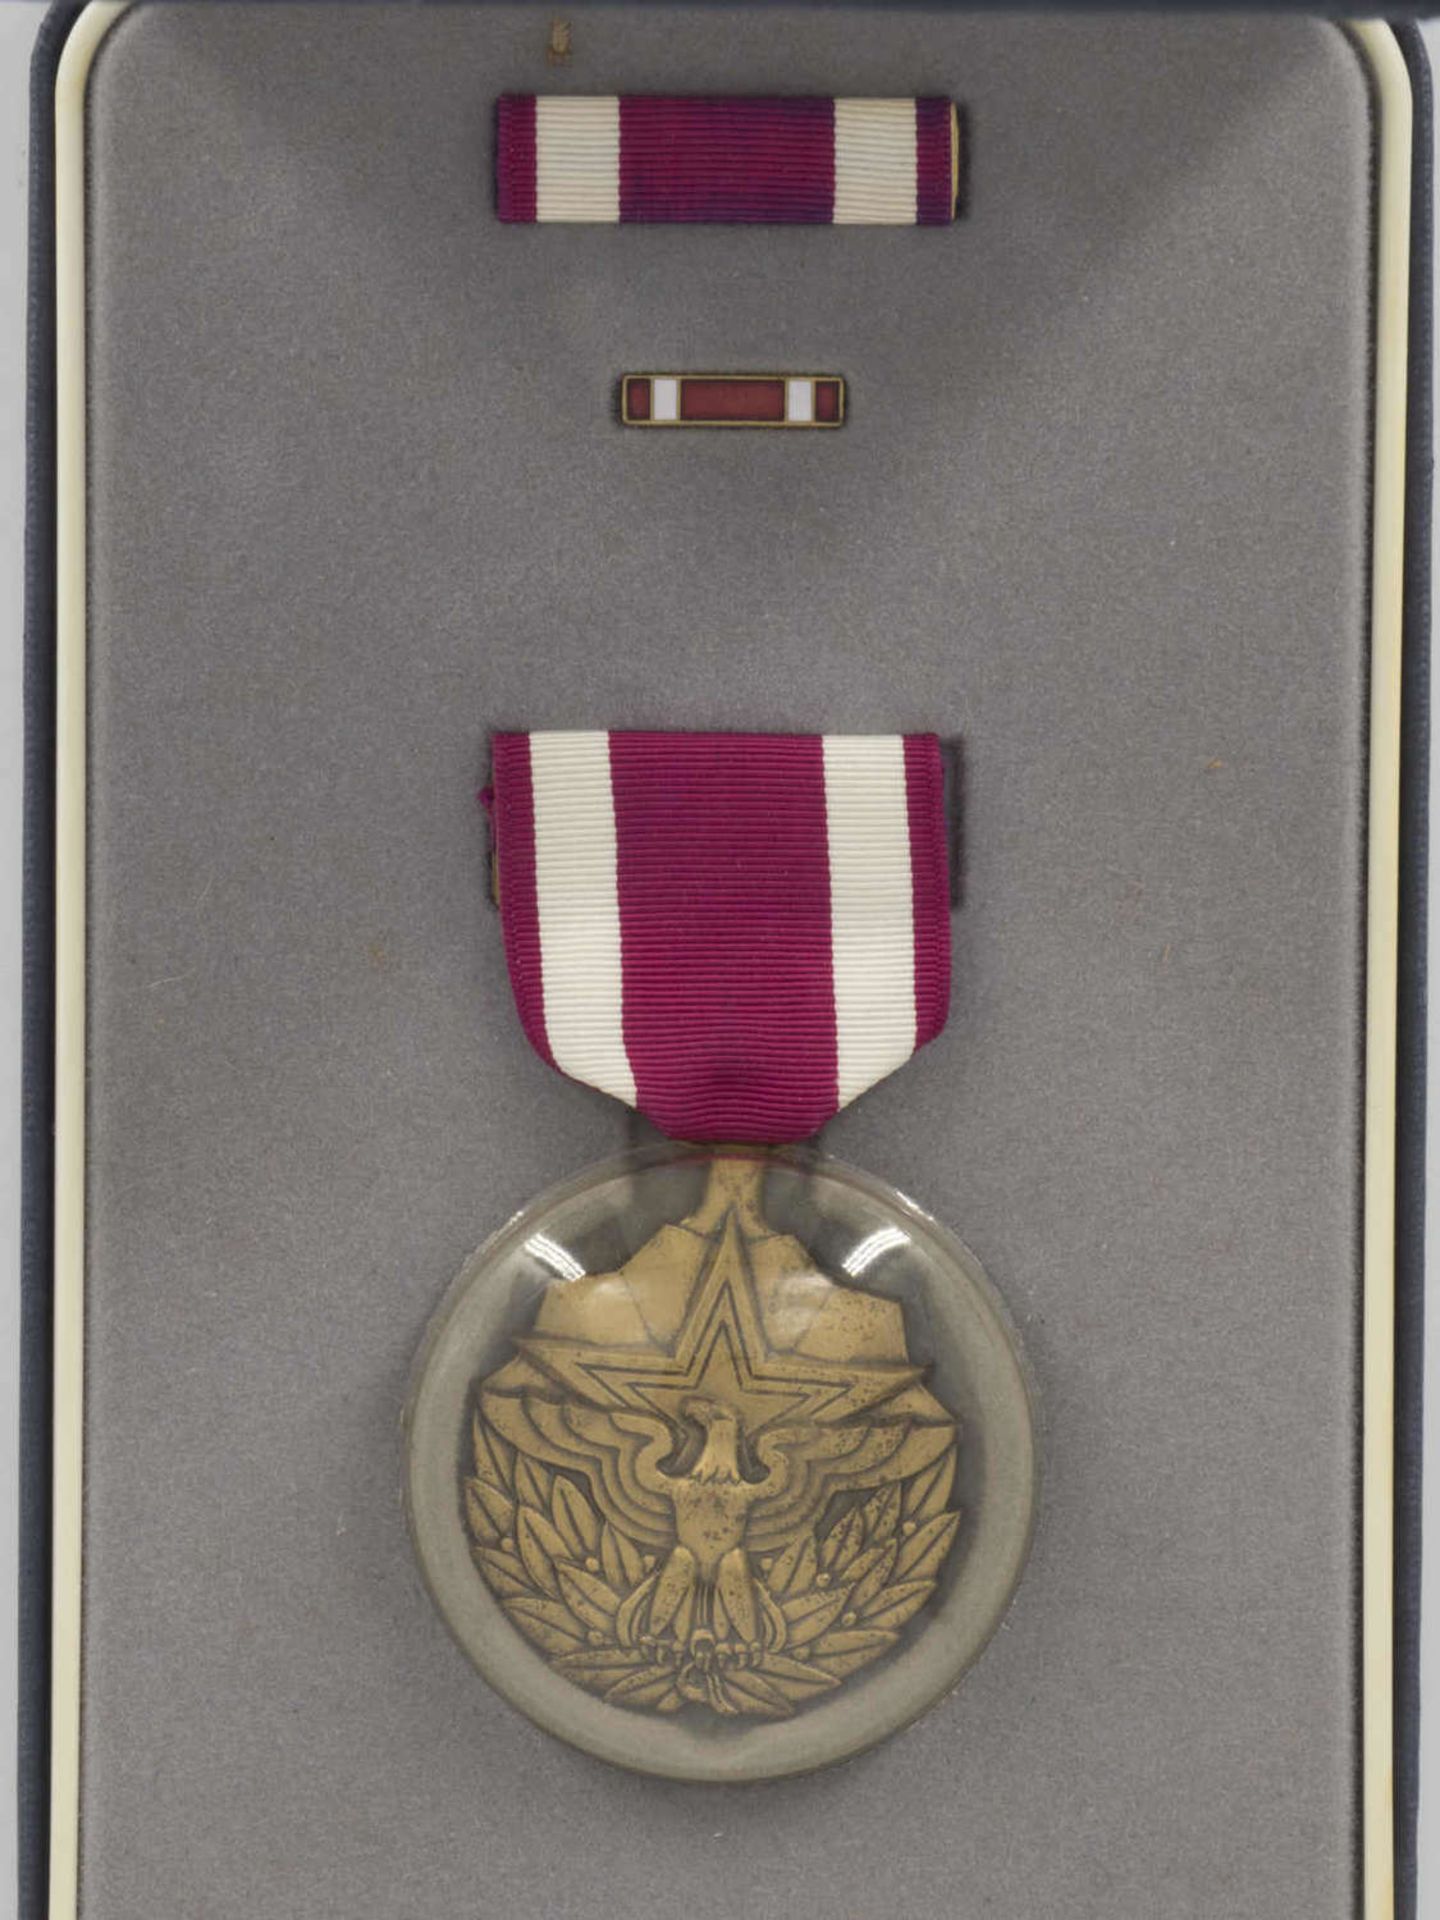 United States Meritorious Service Medal. In orig. Award box. Very good condition.